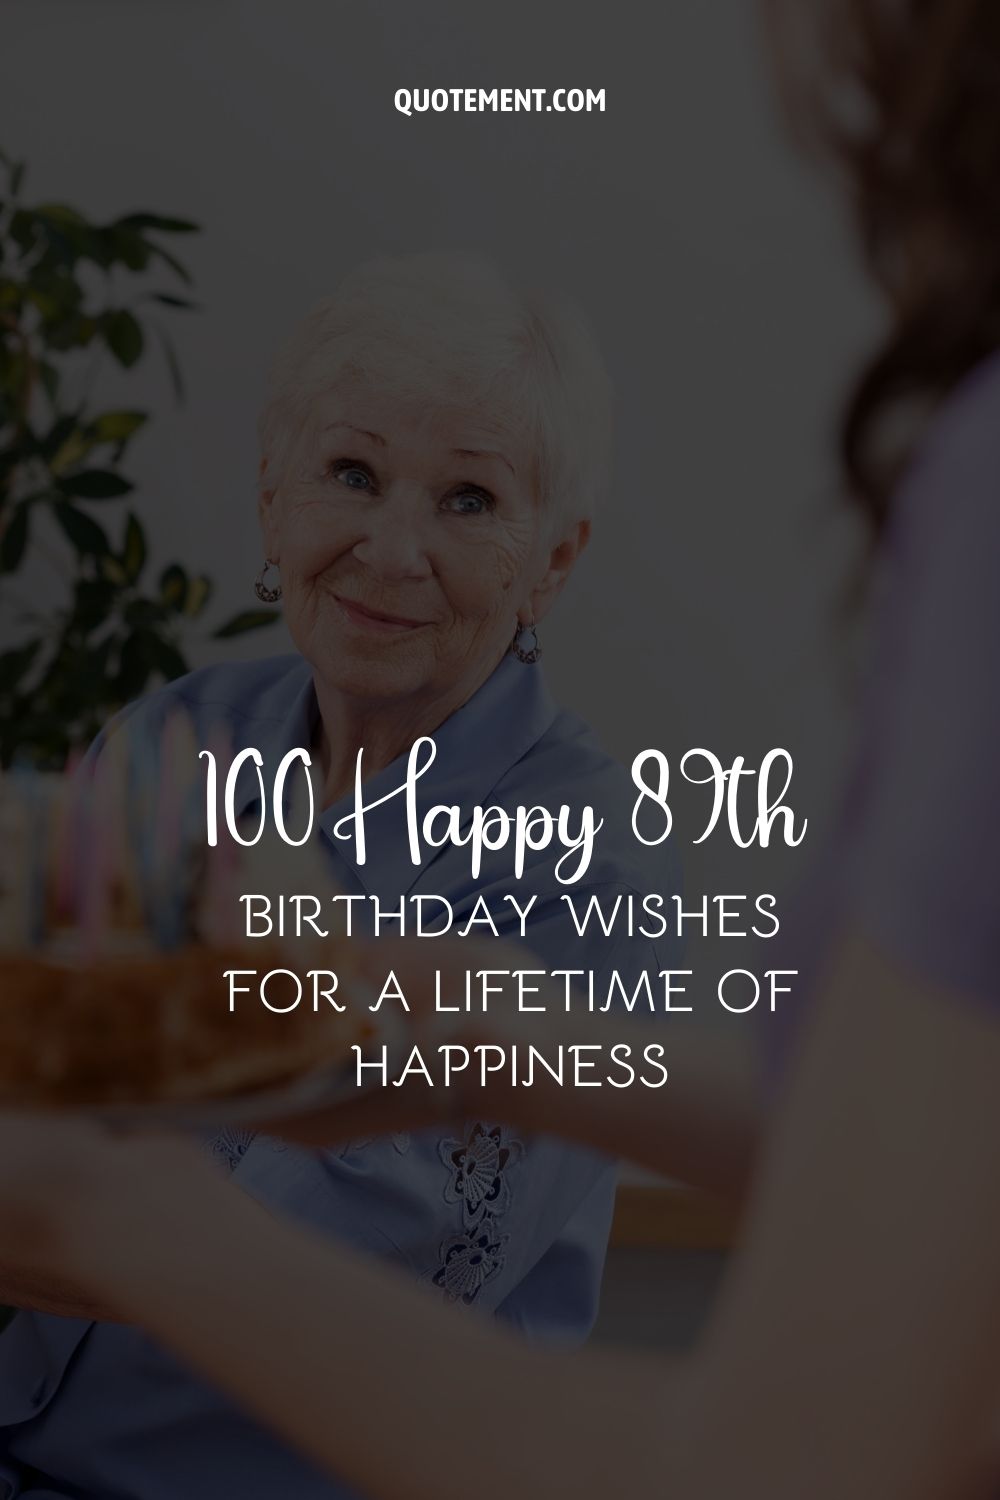 100 Happy 89th Birthday Wishes For A Lifetime Of Happiness
